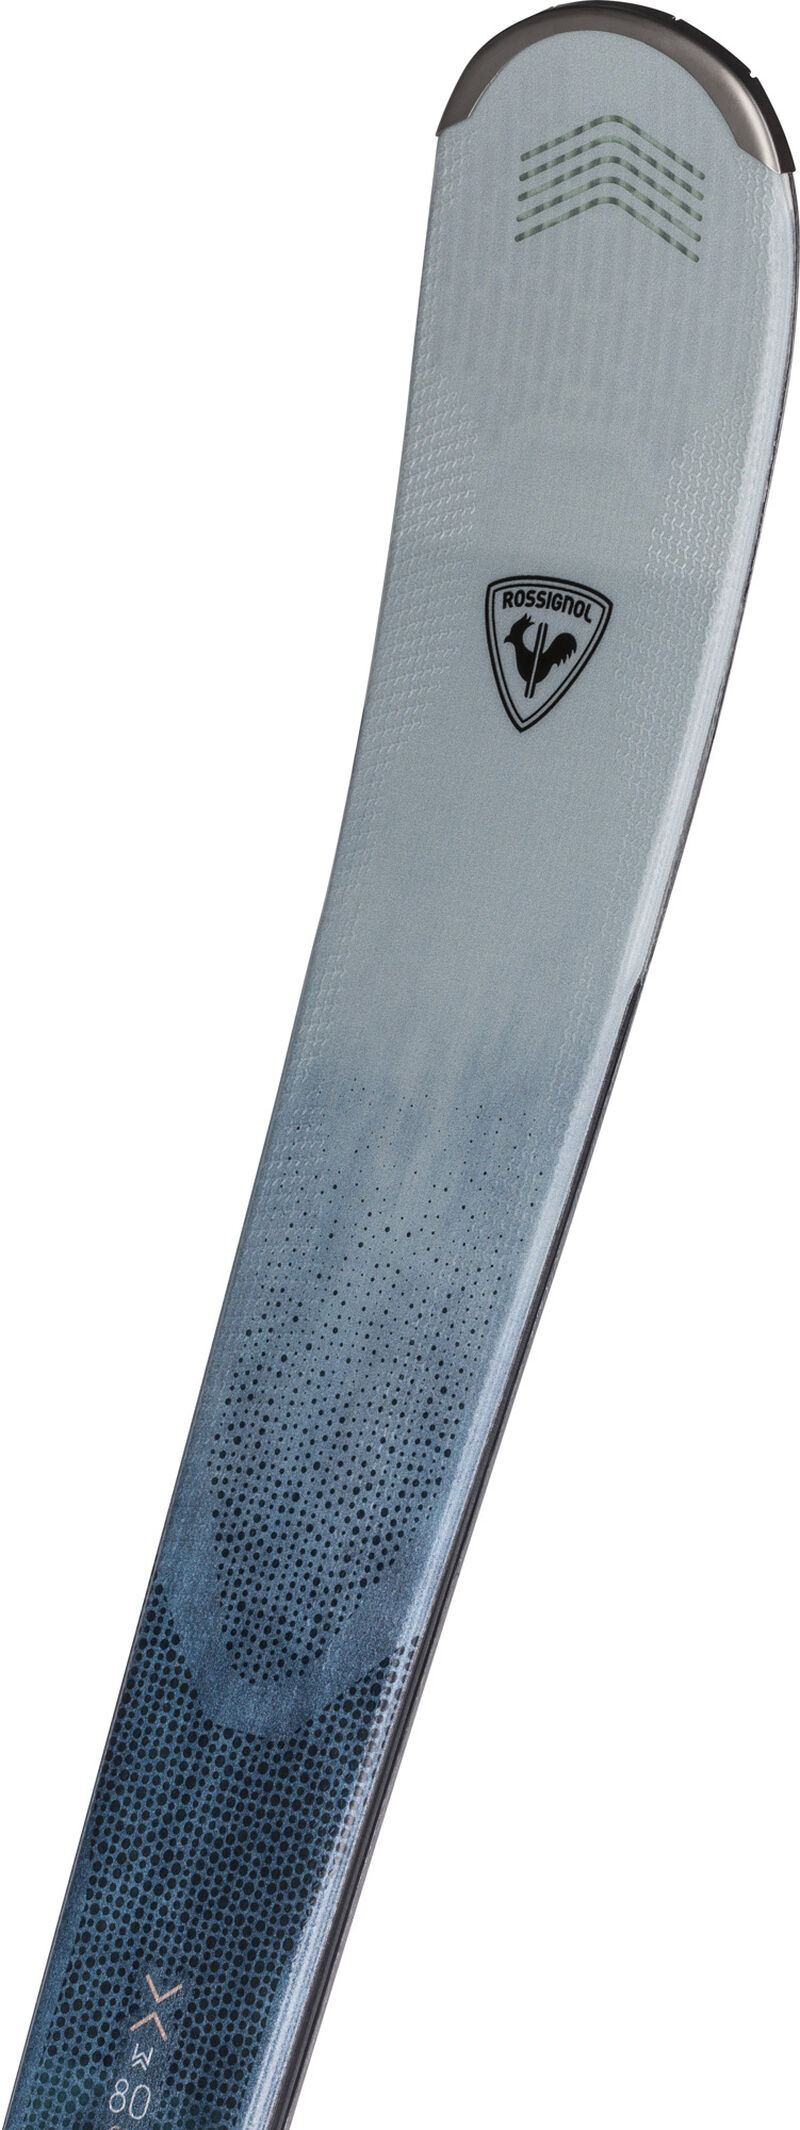 Rossignol Skis All Mountain femme EXPERIENCE W 80 CARBON (XPRESS) 